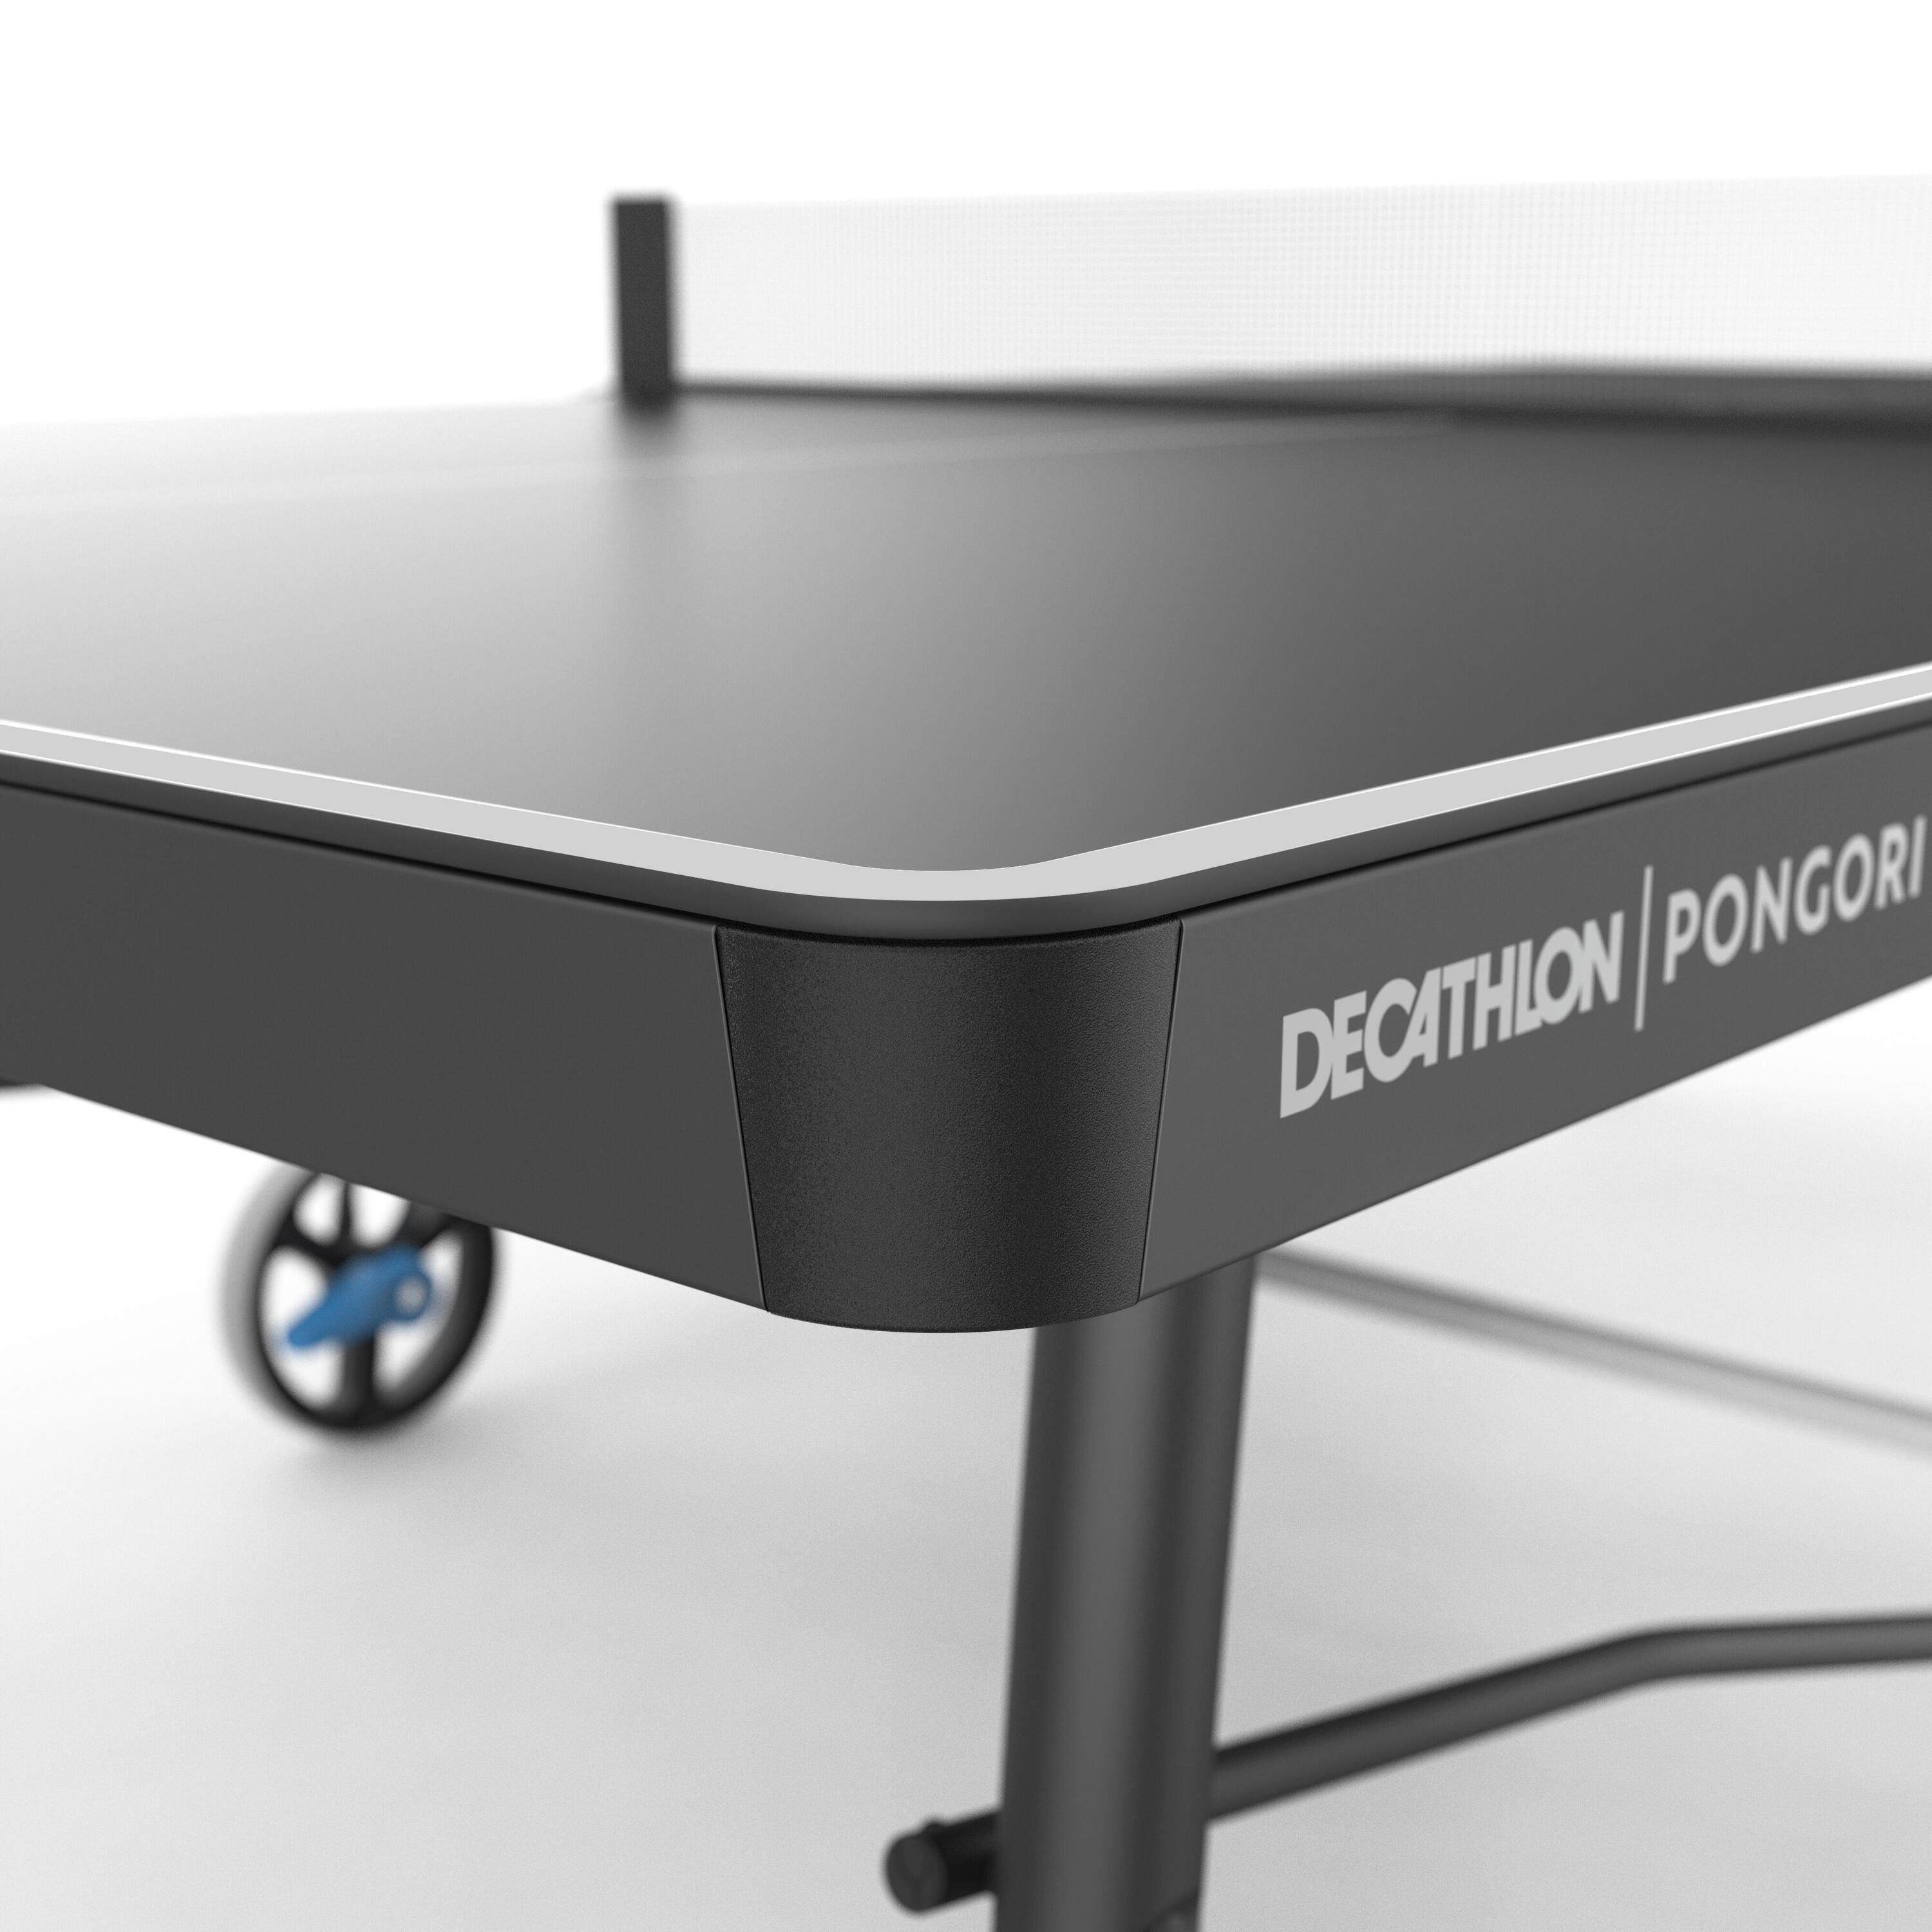 Outdoor Table Tennis Table PPT 930.2 With Cover - Black 9/16